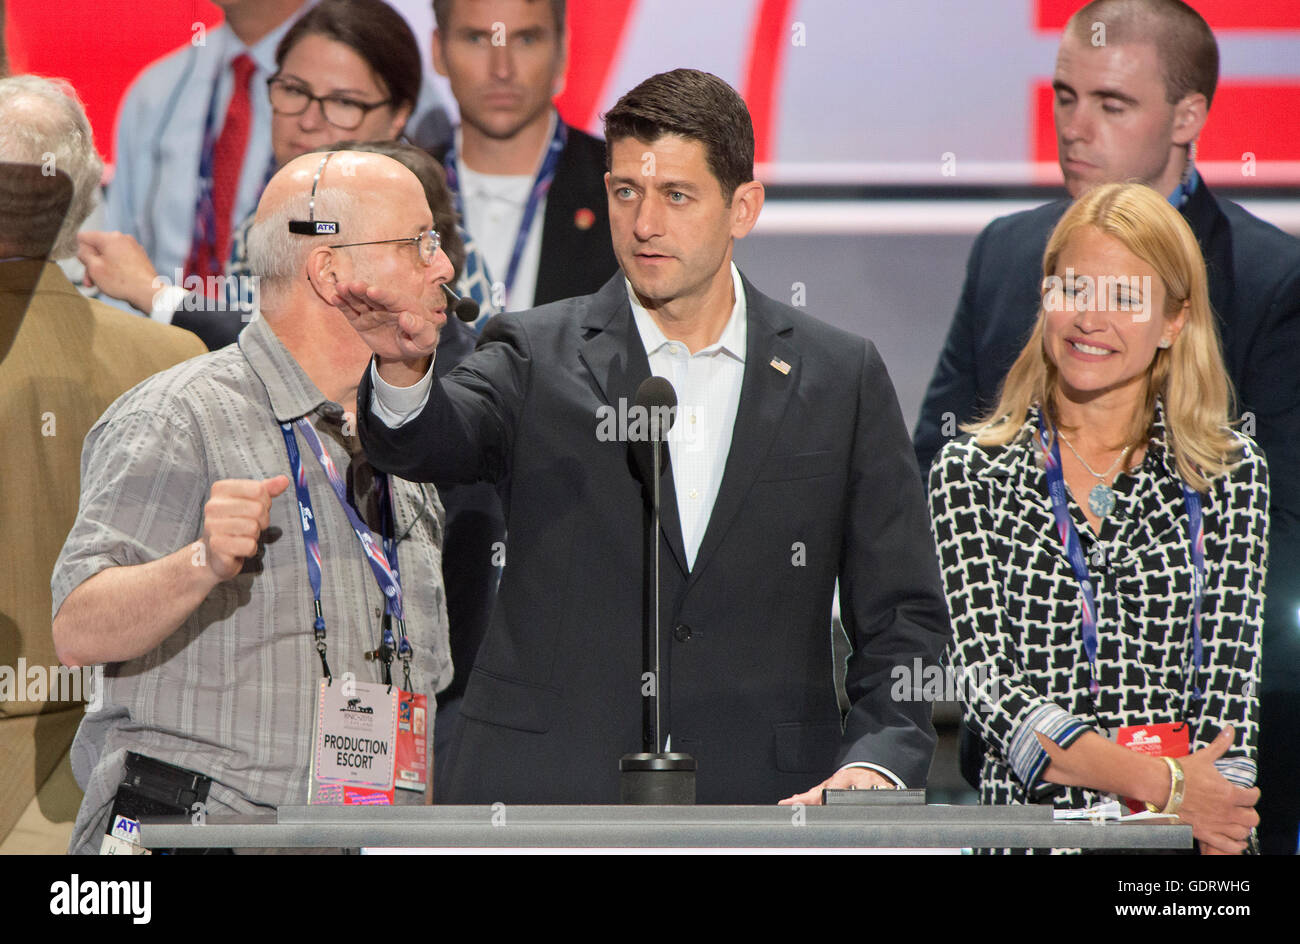 United States Speaker of the House Paul Ryan (Republican of Wisconsin) and his wife Janna participate in a rehearsal prior to the 2016 Republican National Convention in Cleveland, Ohio on Sunday, July 17, 2016. Standing behind them and pointing is US . Credit: Ron Sachs/CNP (RESTRICTION: NO New York or New Jersey Newspapers or newspapers within a 75 mile radius of New York City) - NO WIRE SERVICE - Stock Photo